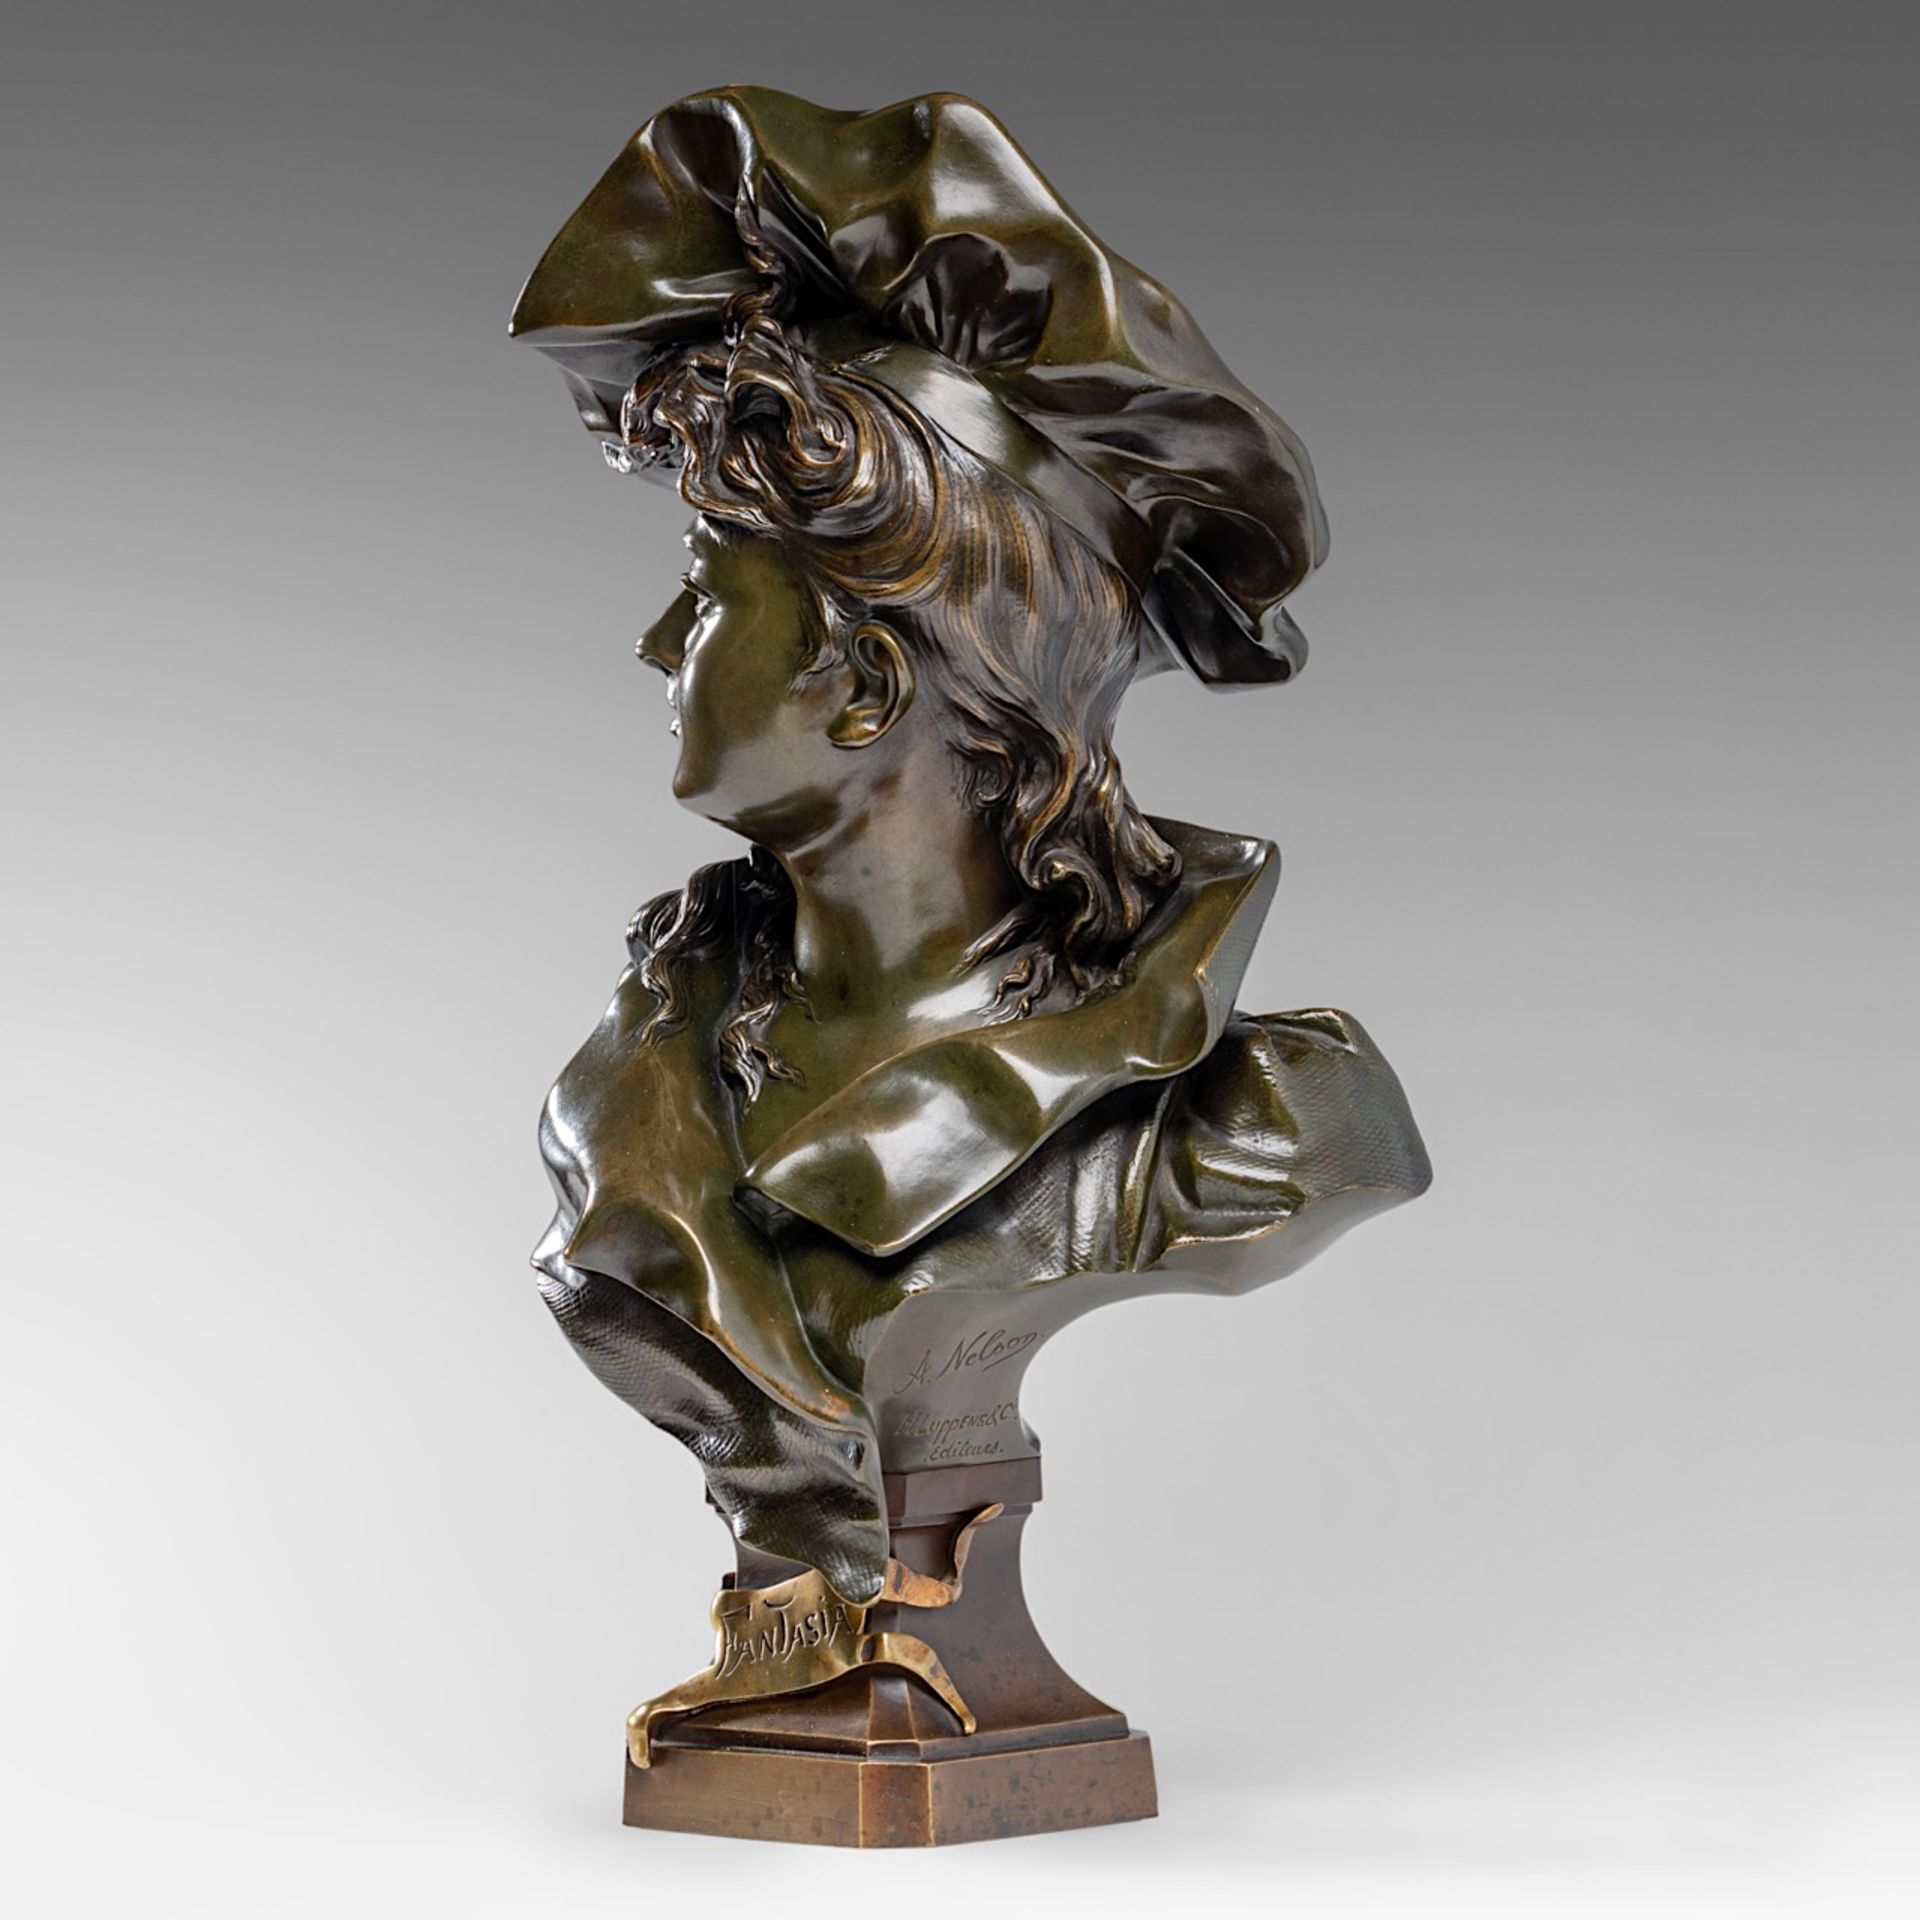 Anton Nelson (1849-1910), 'Fantasia', green patinated bronze bust, H 48 cm - Image 3 of 11